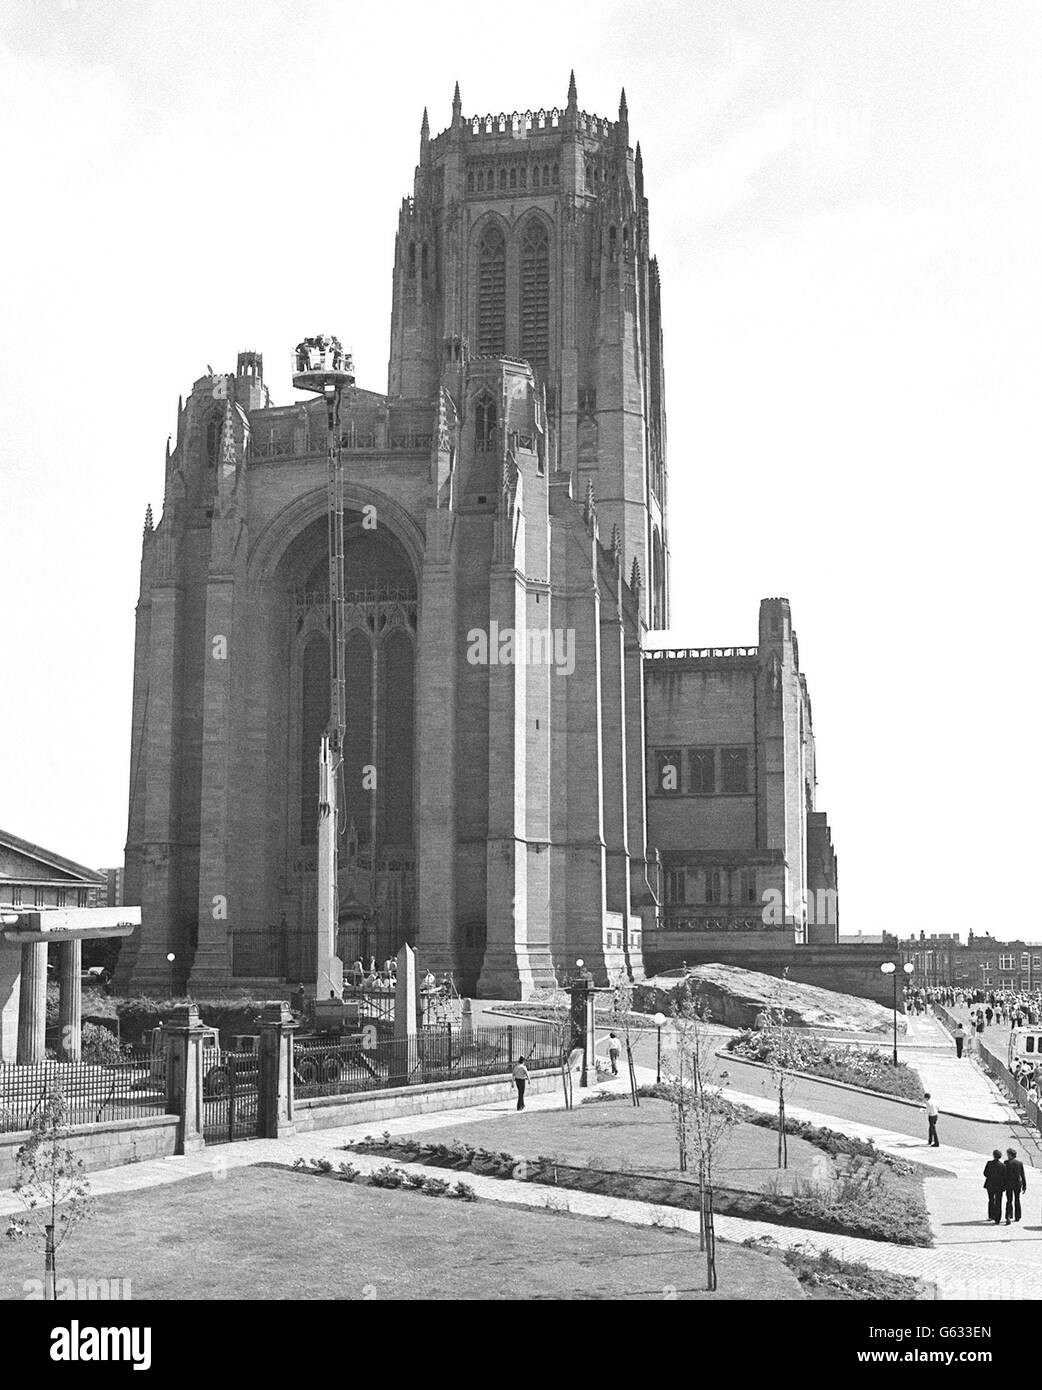 Religion - The Anglican Cathedral - Liverpool. The Anglican Cathedral in Liverpool. Stock Photo